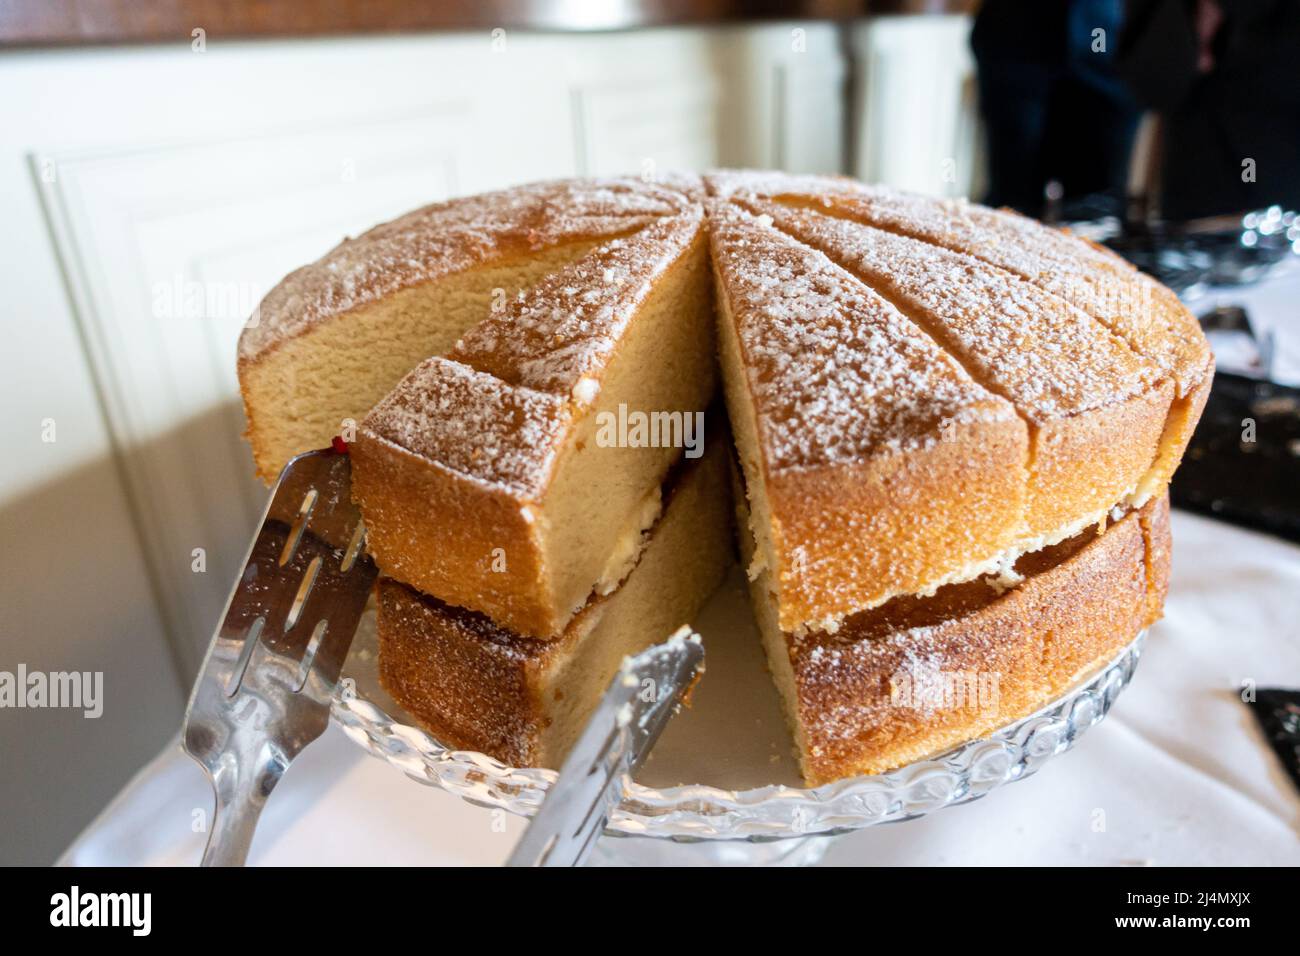 A Victoria sponge cake filled with butter icing and jam has been cut into slices ready for serving. Stock Photo